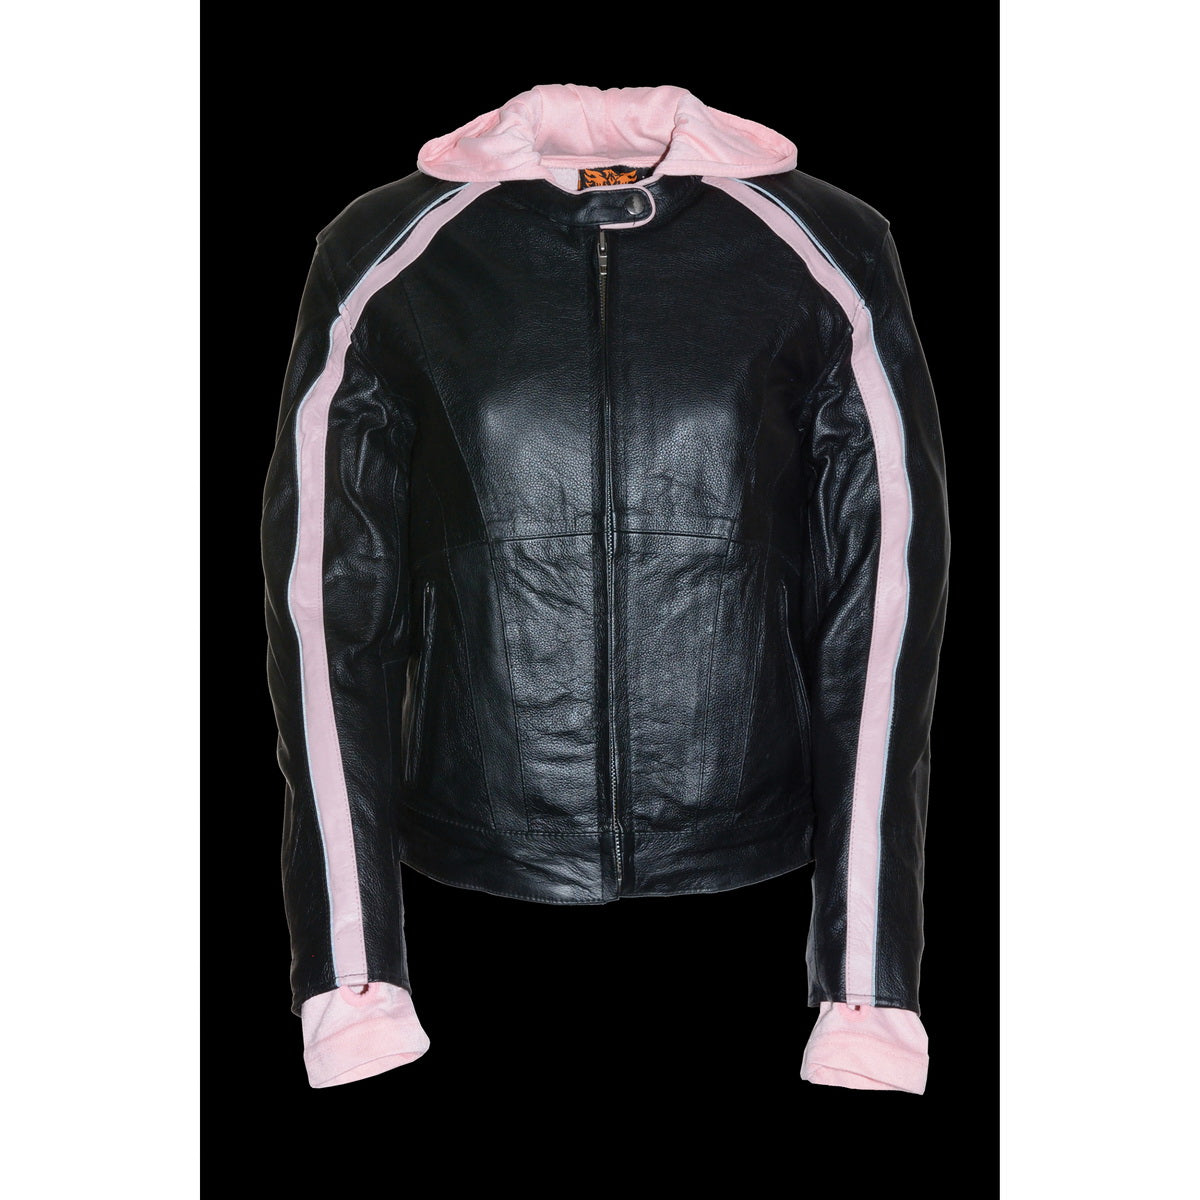 Milwaukee Leather SH1951 Women's Black and Pink Striped Leather Jacket with Zip-Out Hoodie